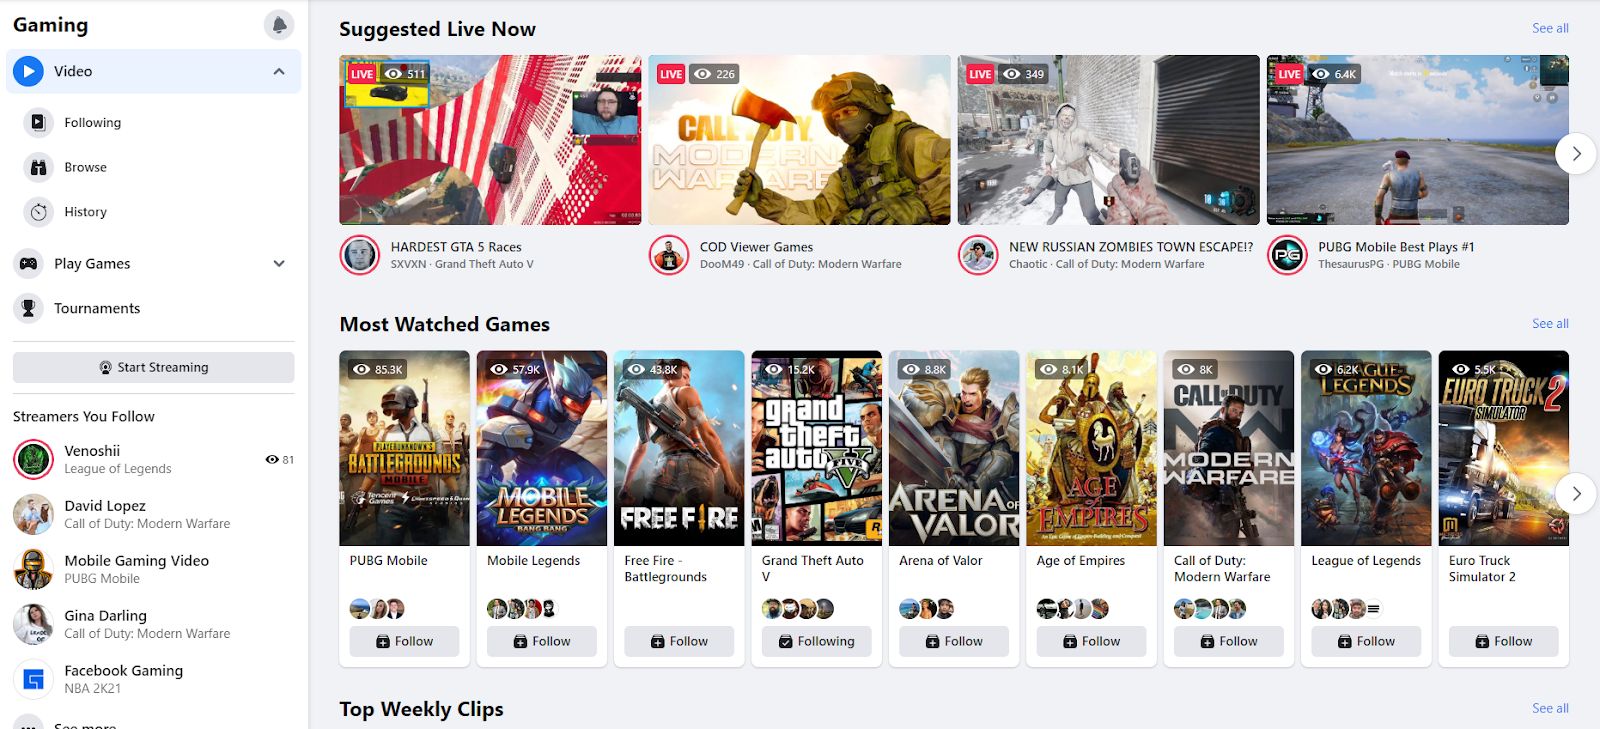 The Best Games To Stream On Facebook 2021 UPDATED